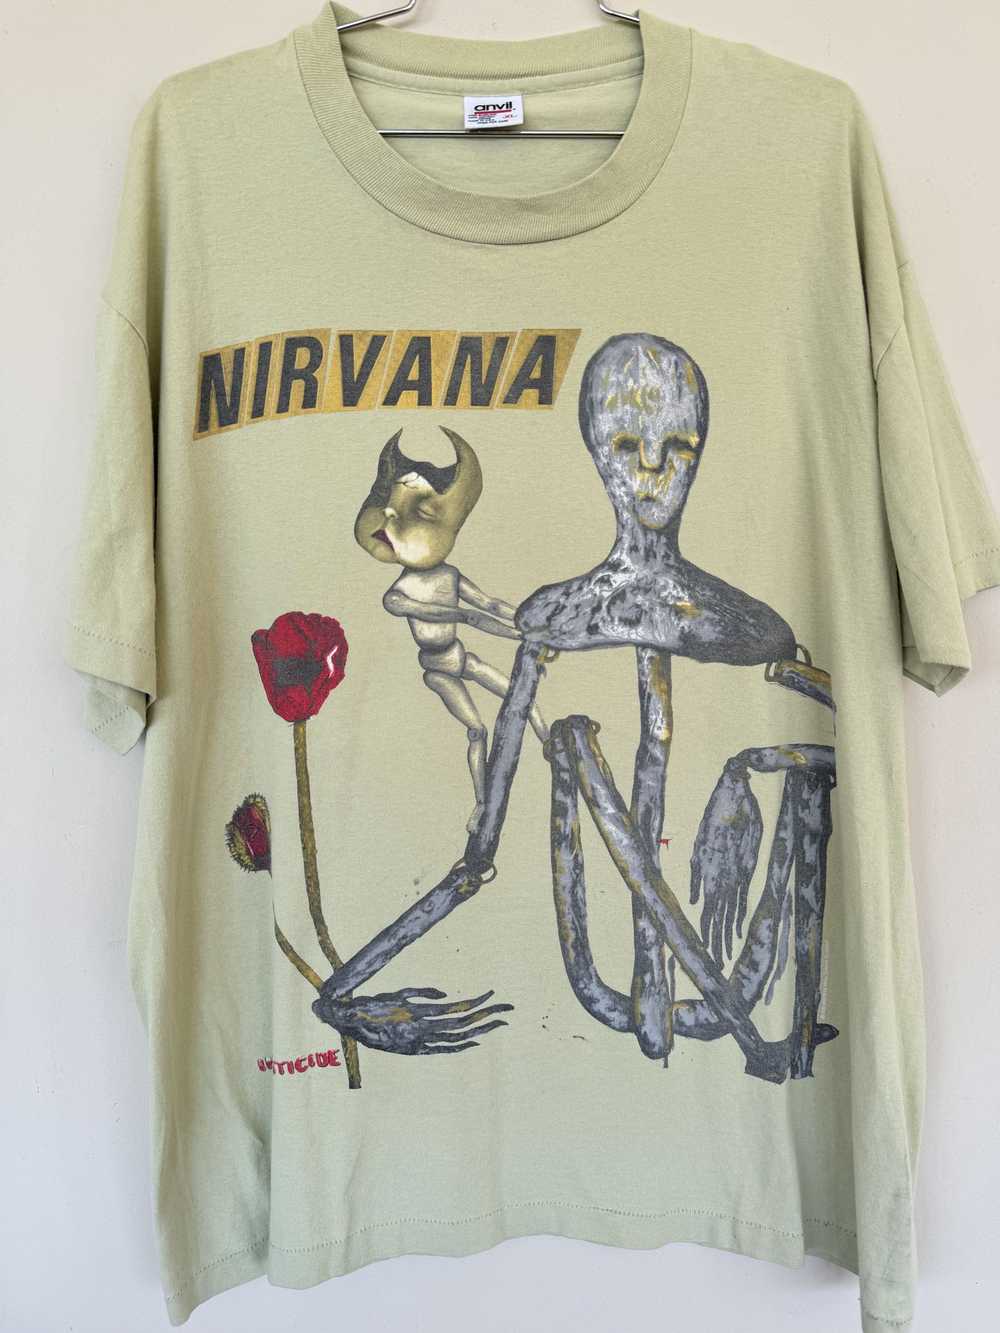 Vintage Nirvana Insecticide Tee 1993 - image 2